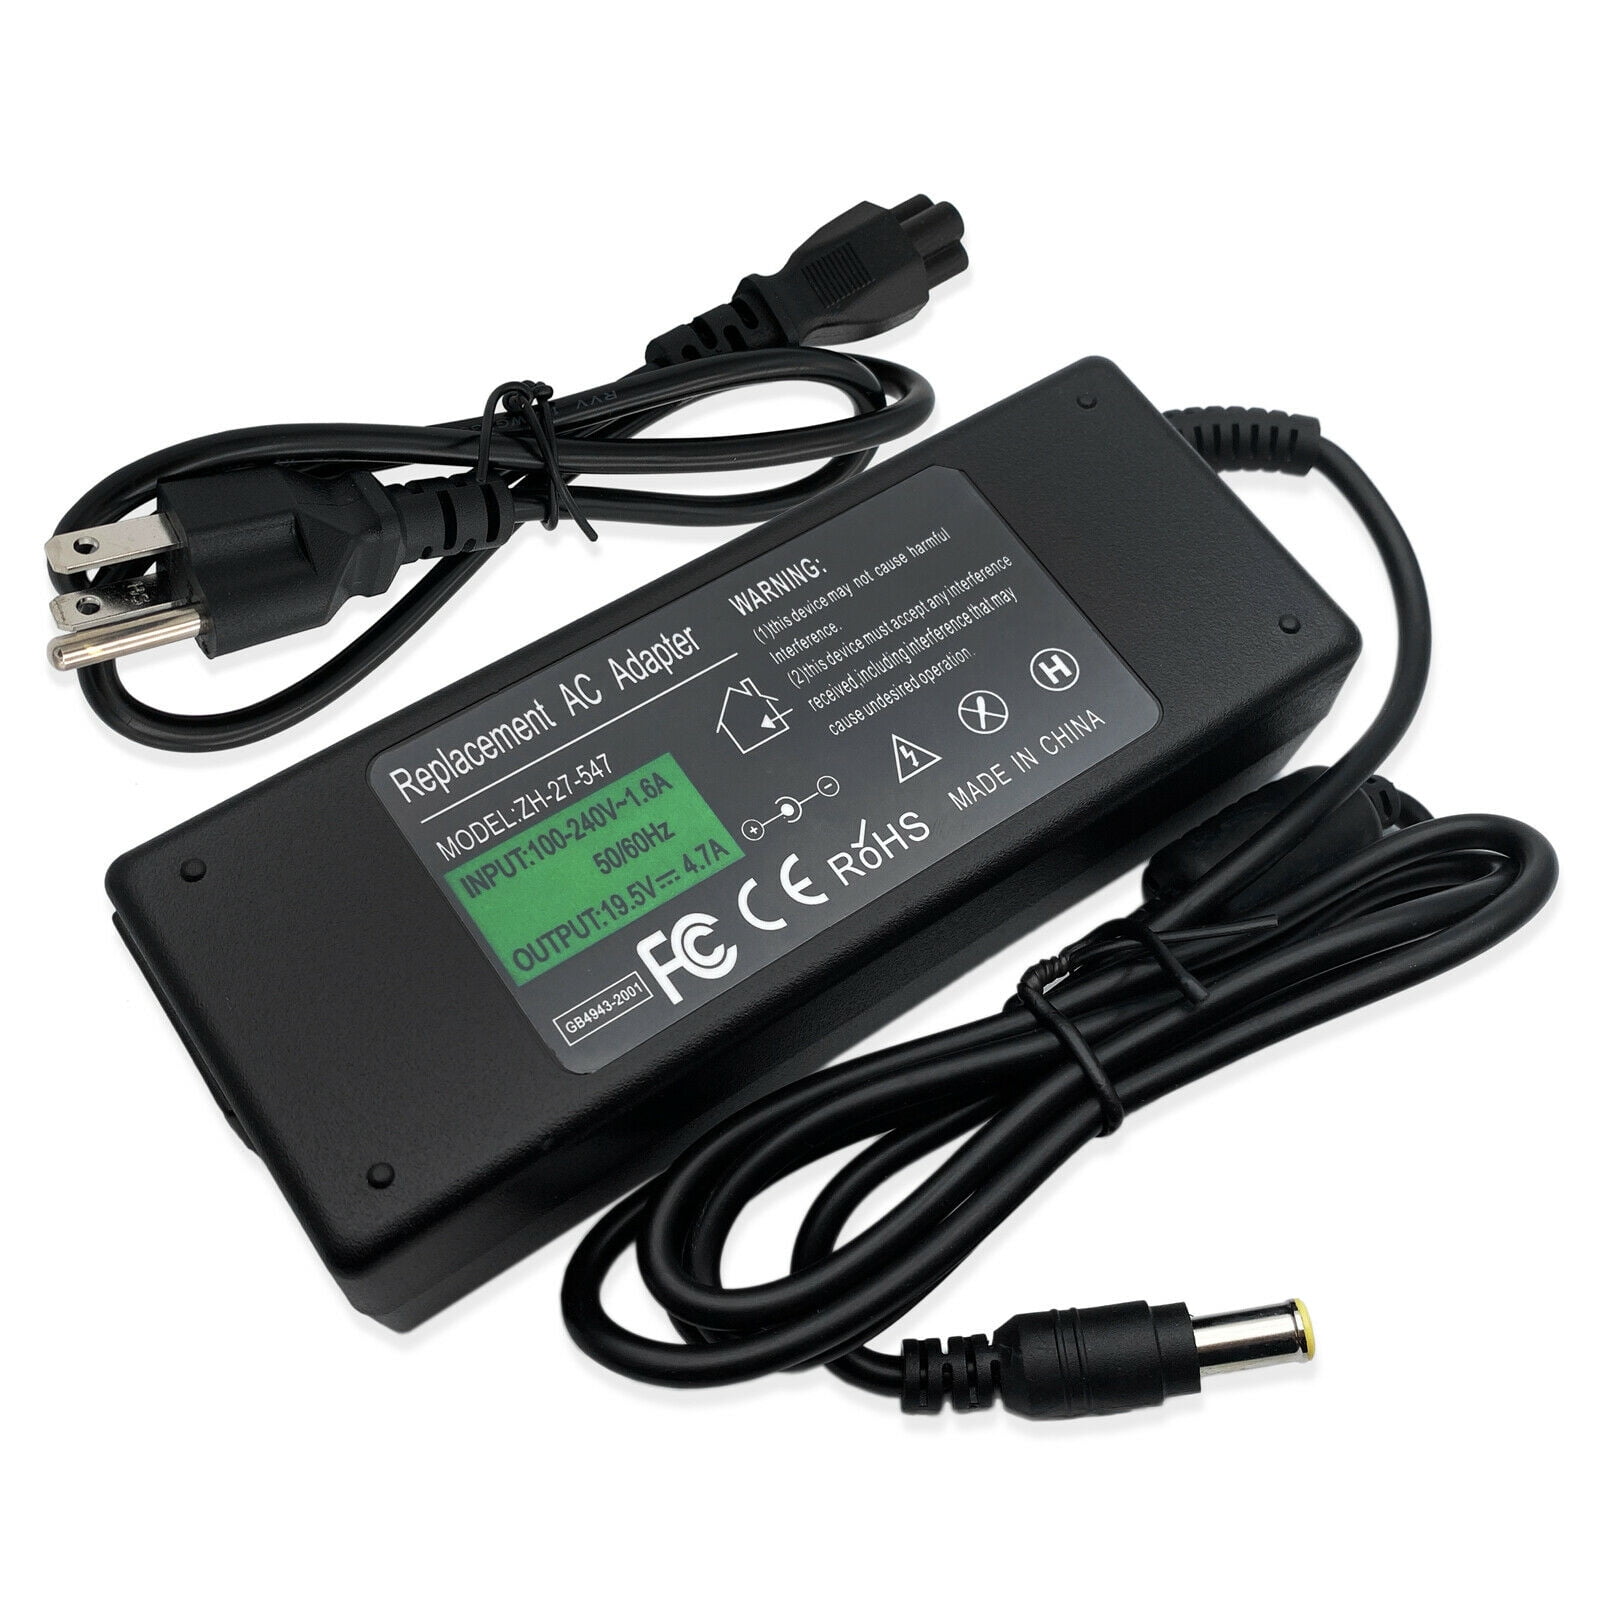 19.5V 4.7A AC Adapter Charger for Sony Vaio PCG-3G2L PCG-7162L Laptop Power - Walmart.com